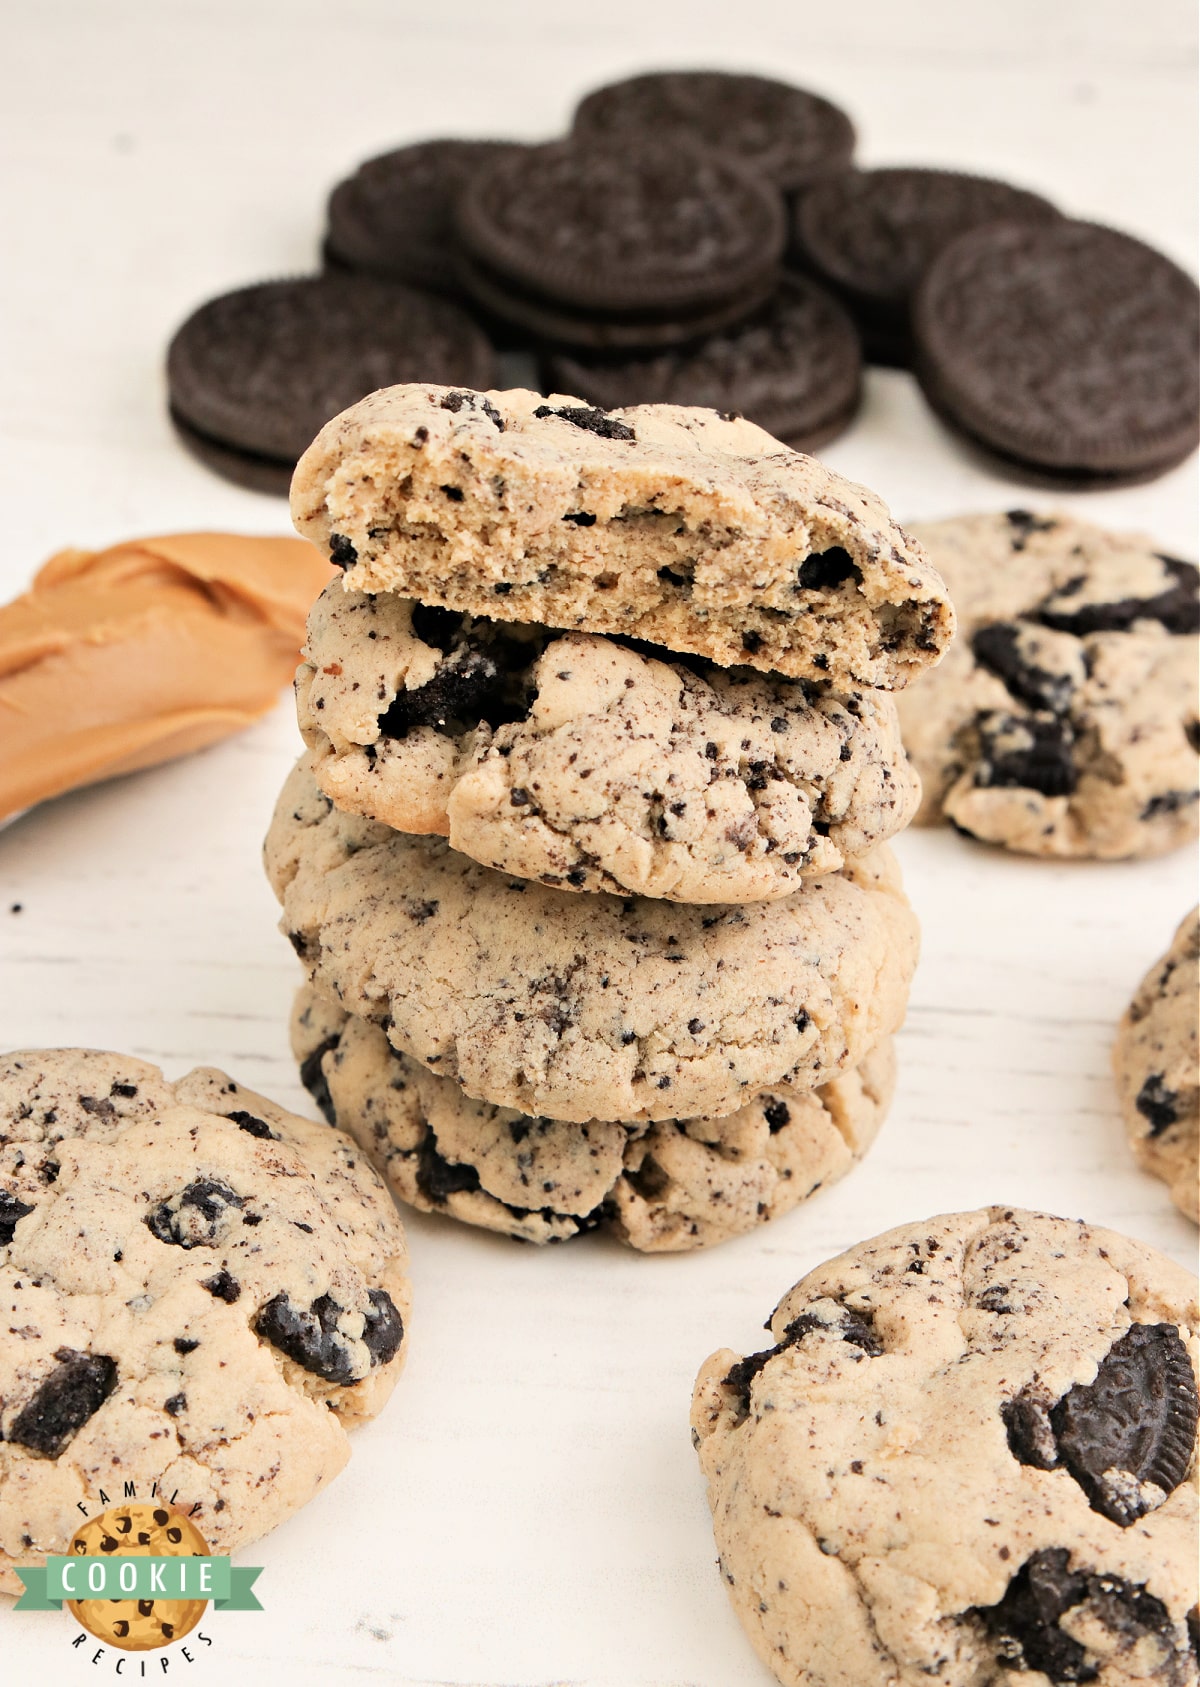 Oreo Peanut Butter Cookies are soft and chewy peanut butter cookies made with Oreo pudding mix and crushed Oreo cookies. 